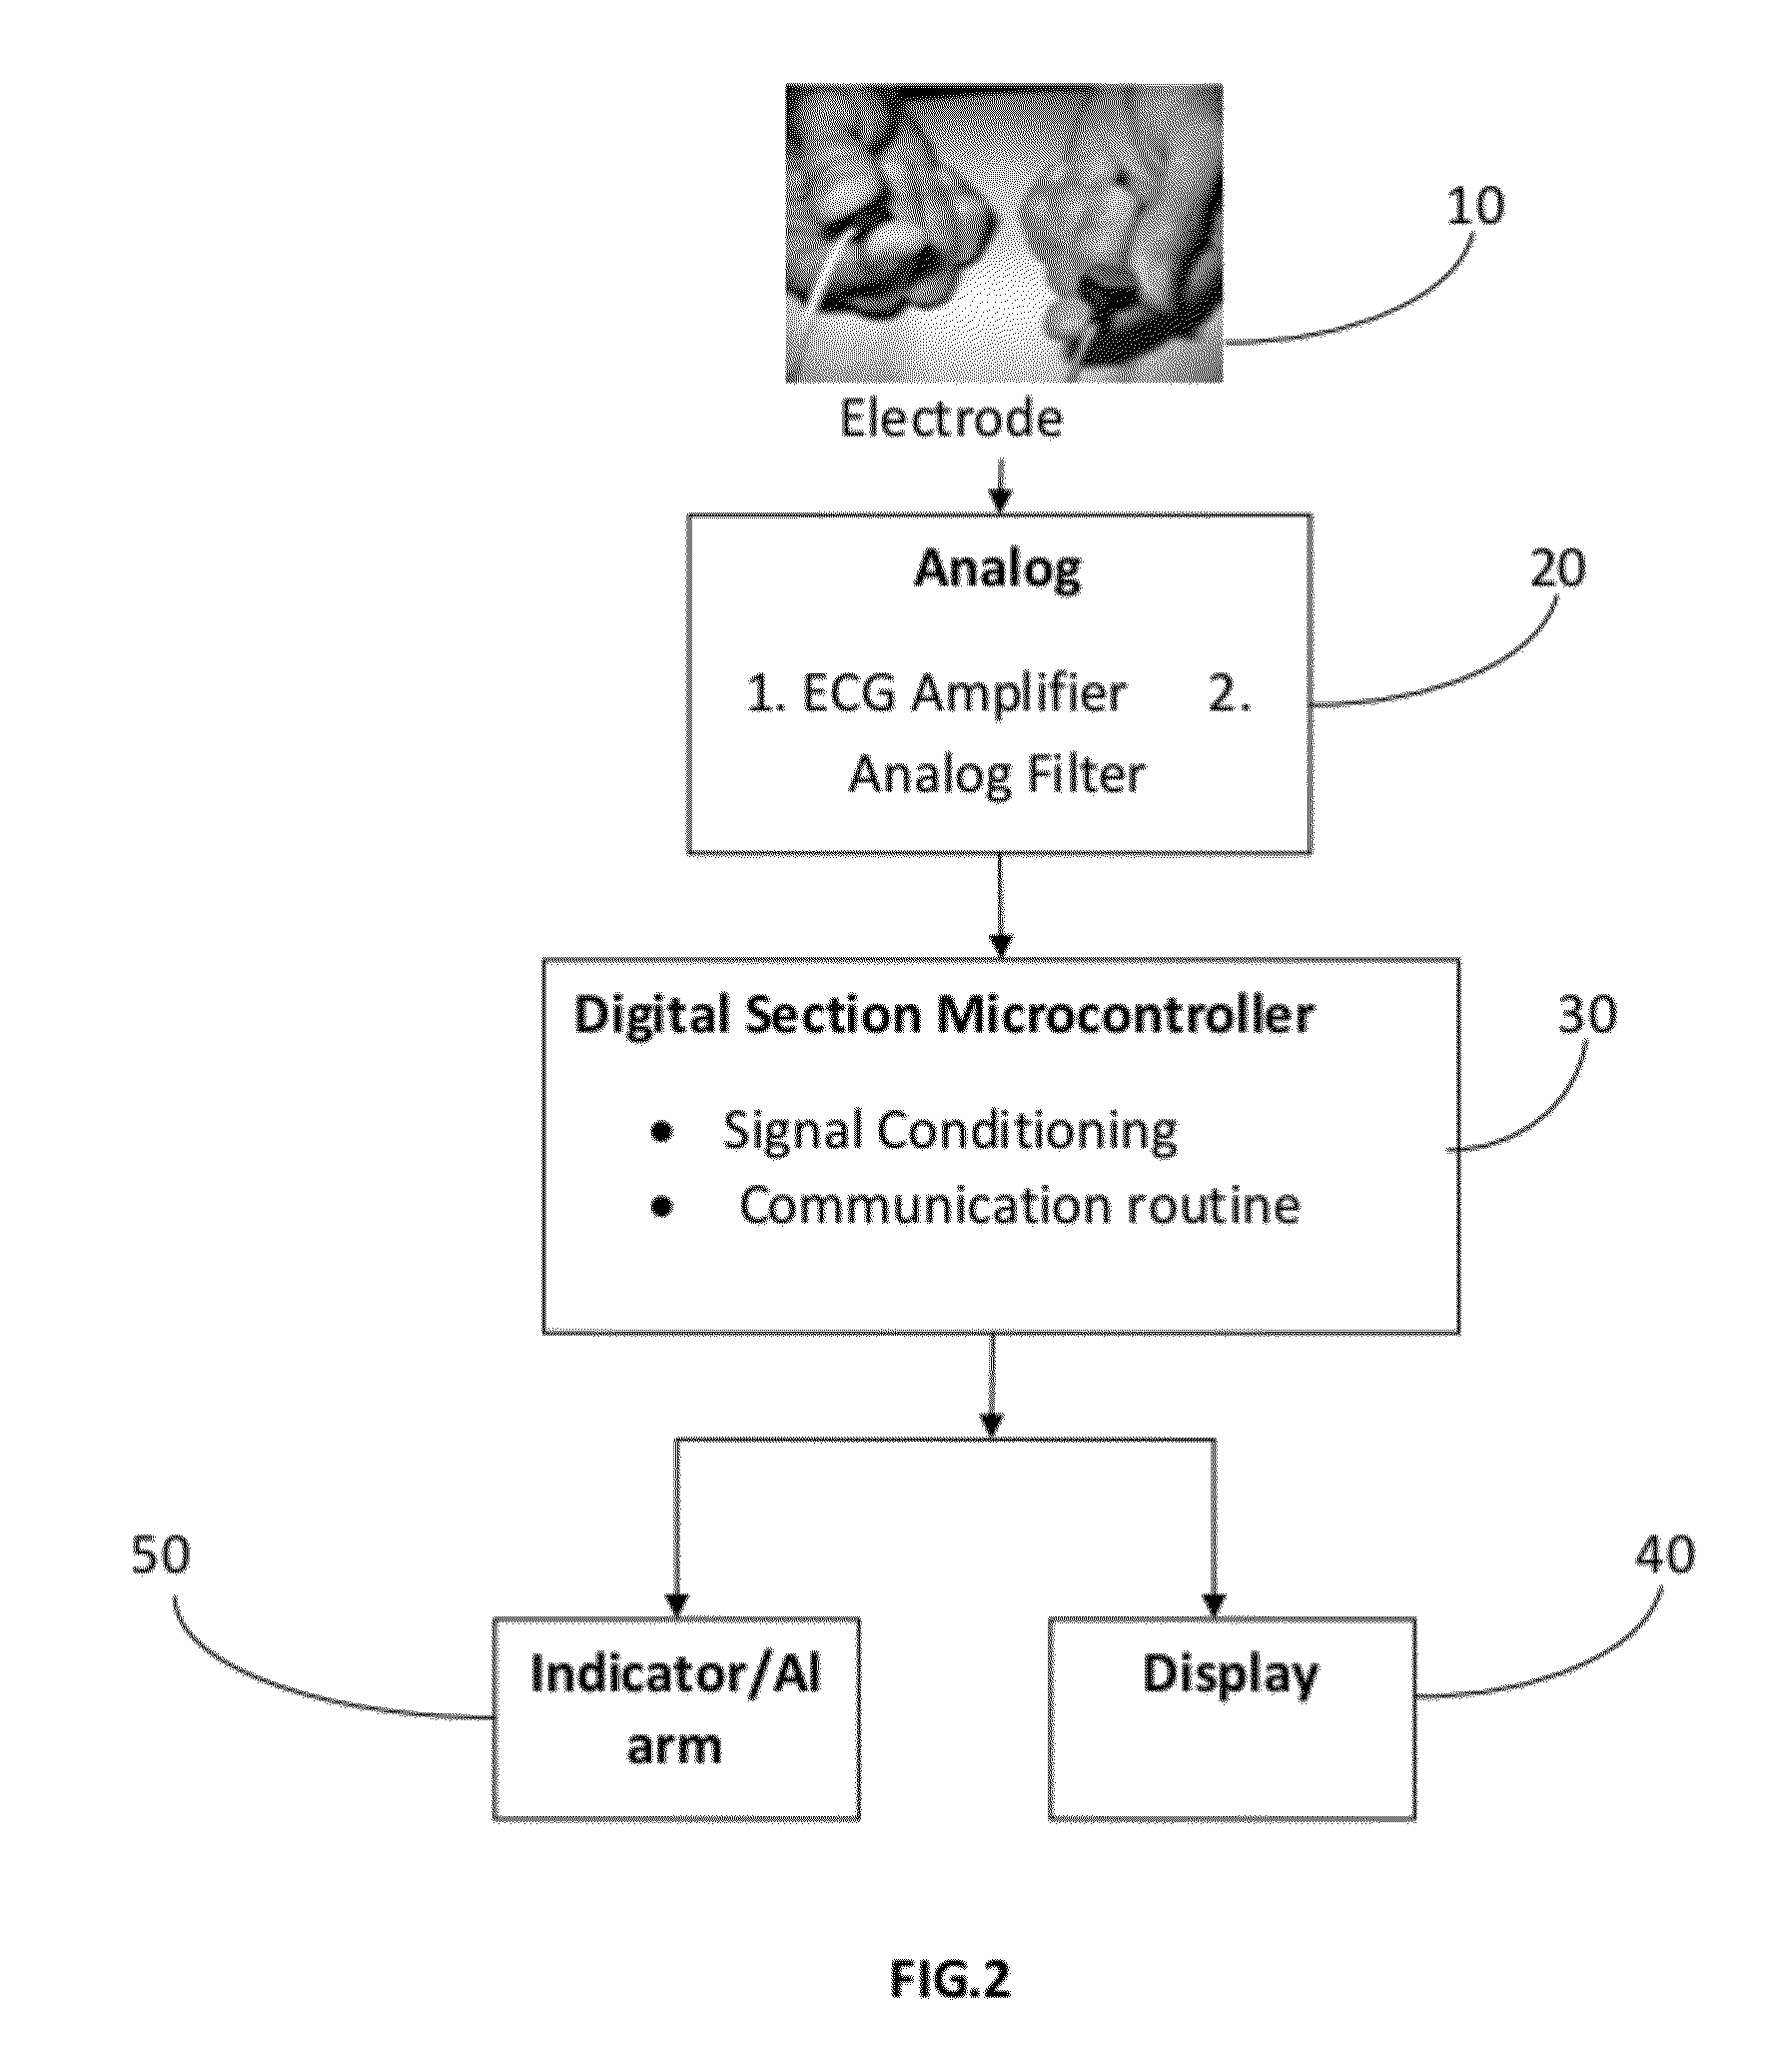 System for vehicle security, personalization and cardiac activity monitoring of a driver